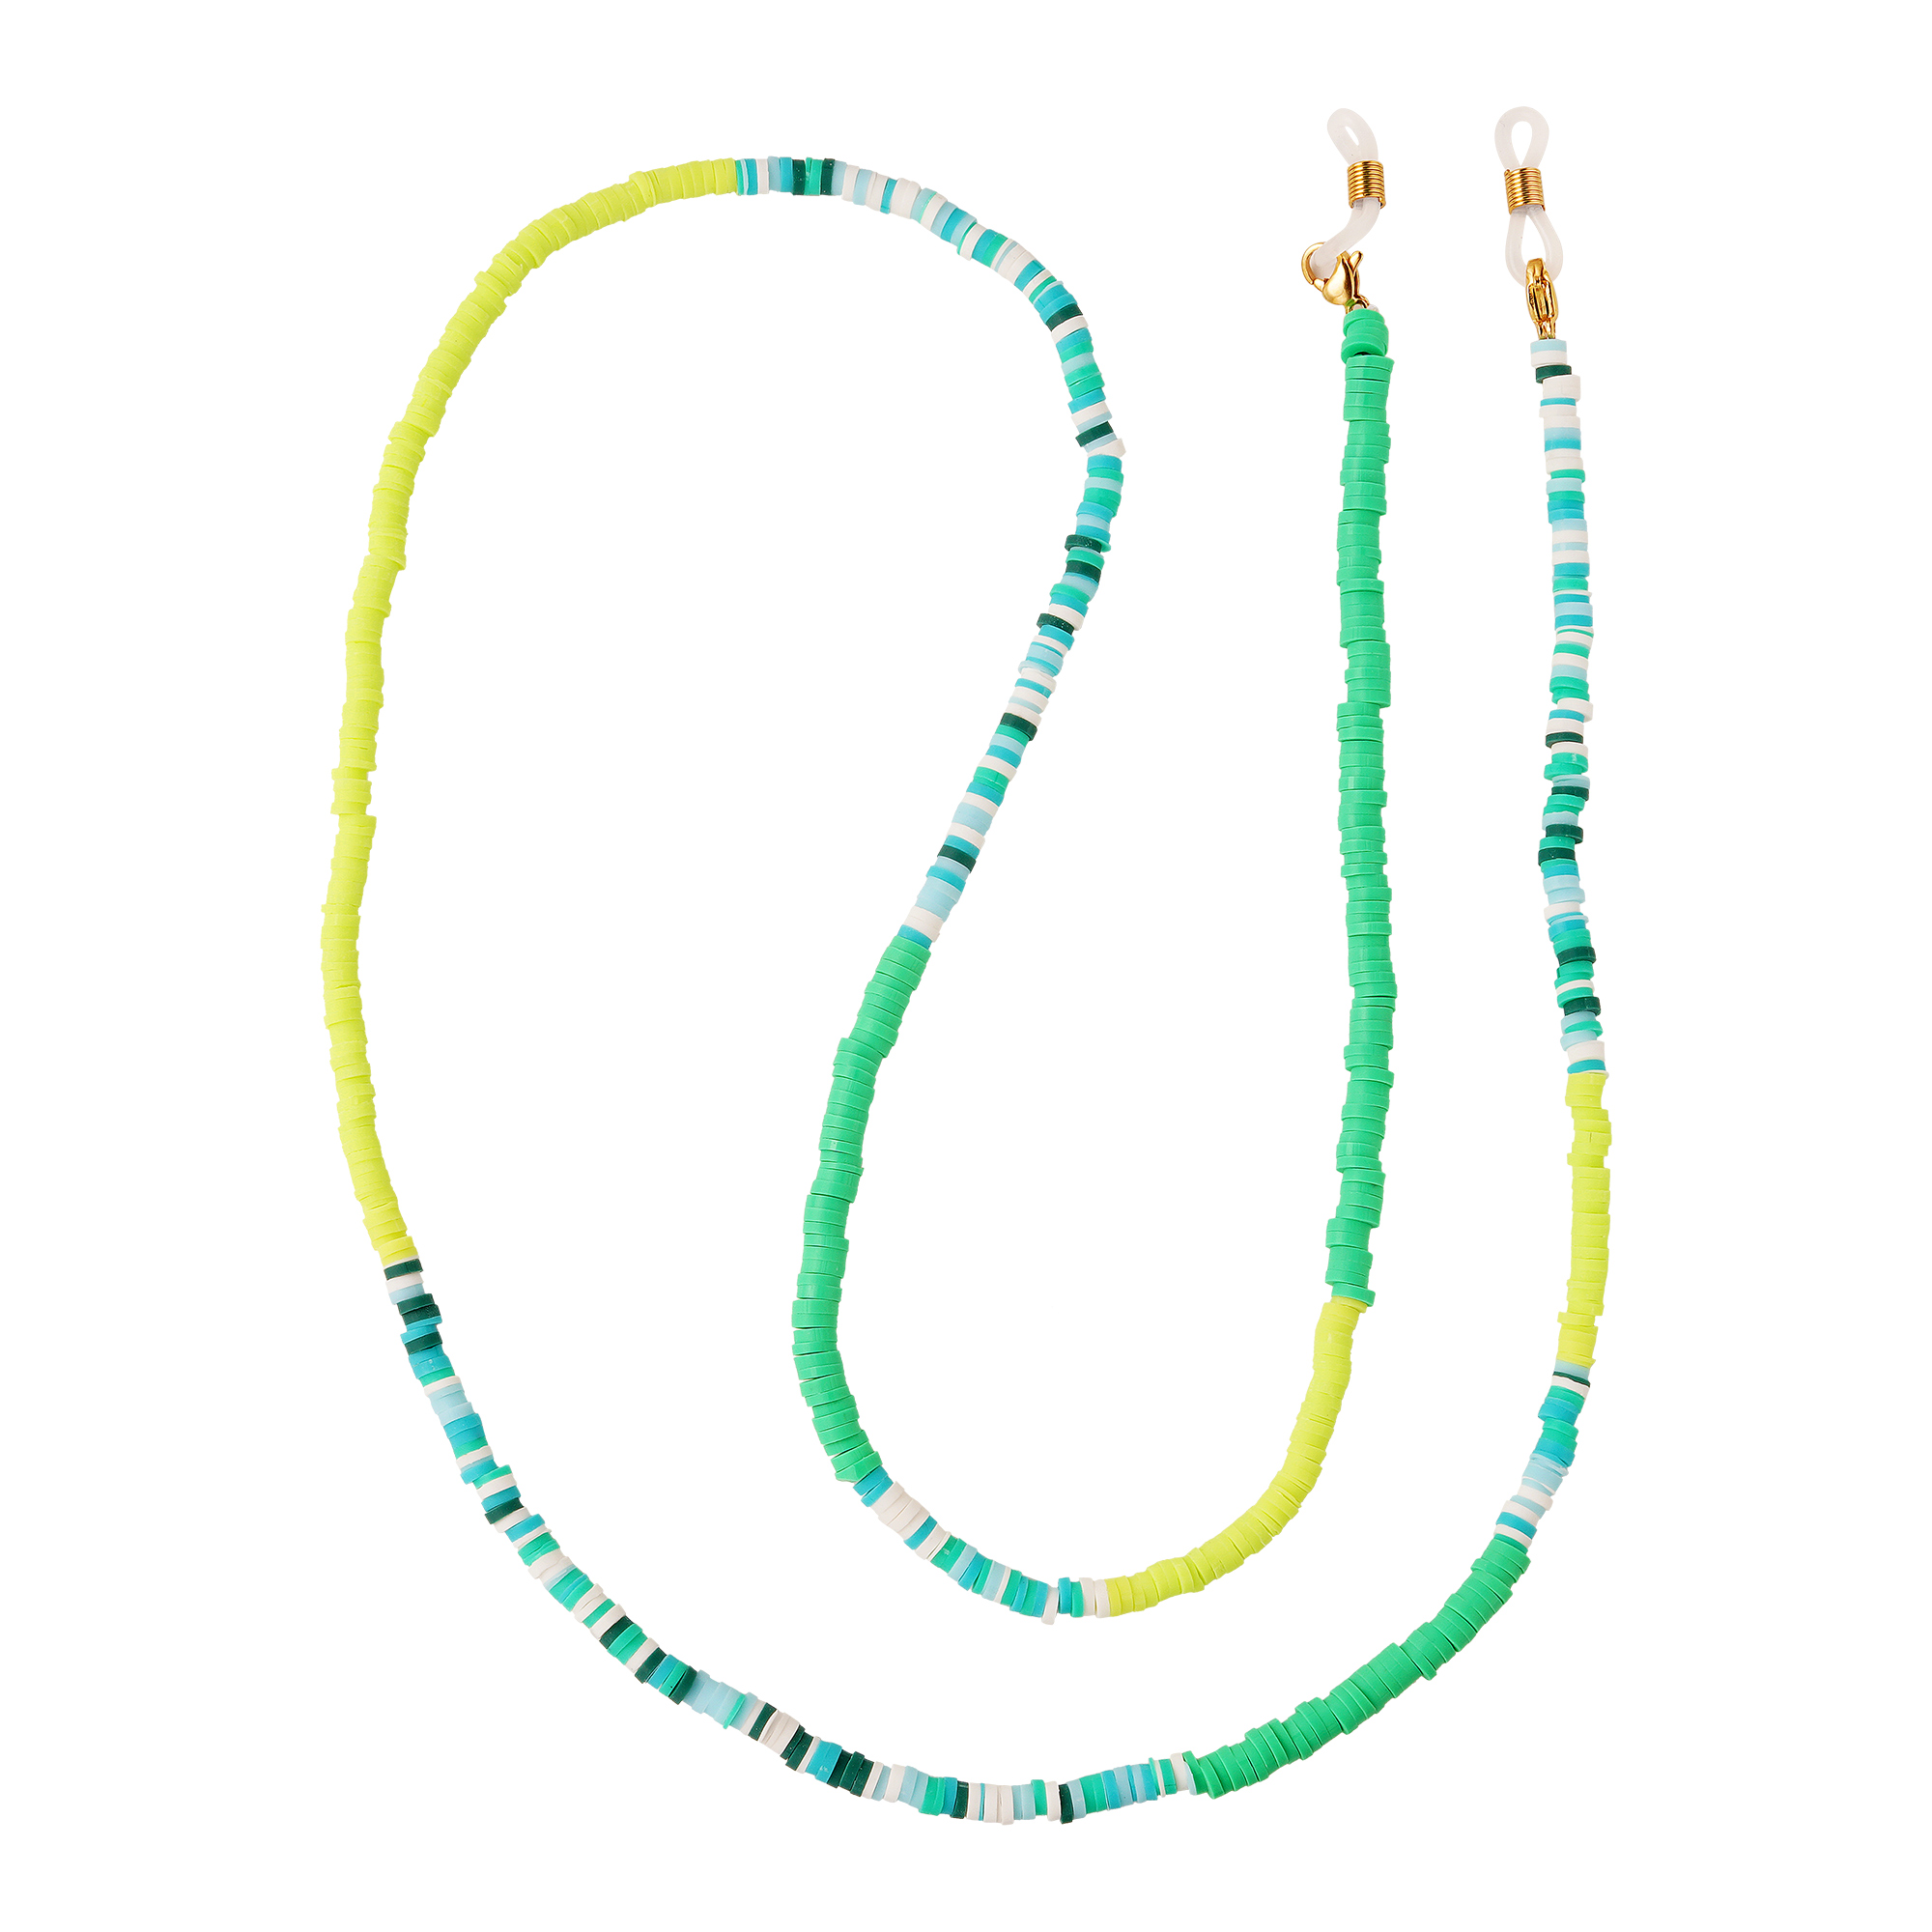 Adult - yellow and green neon sunglasses cord - Mother-Daughter collection